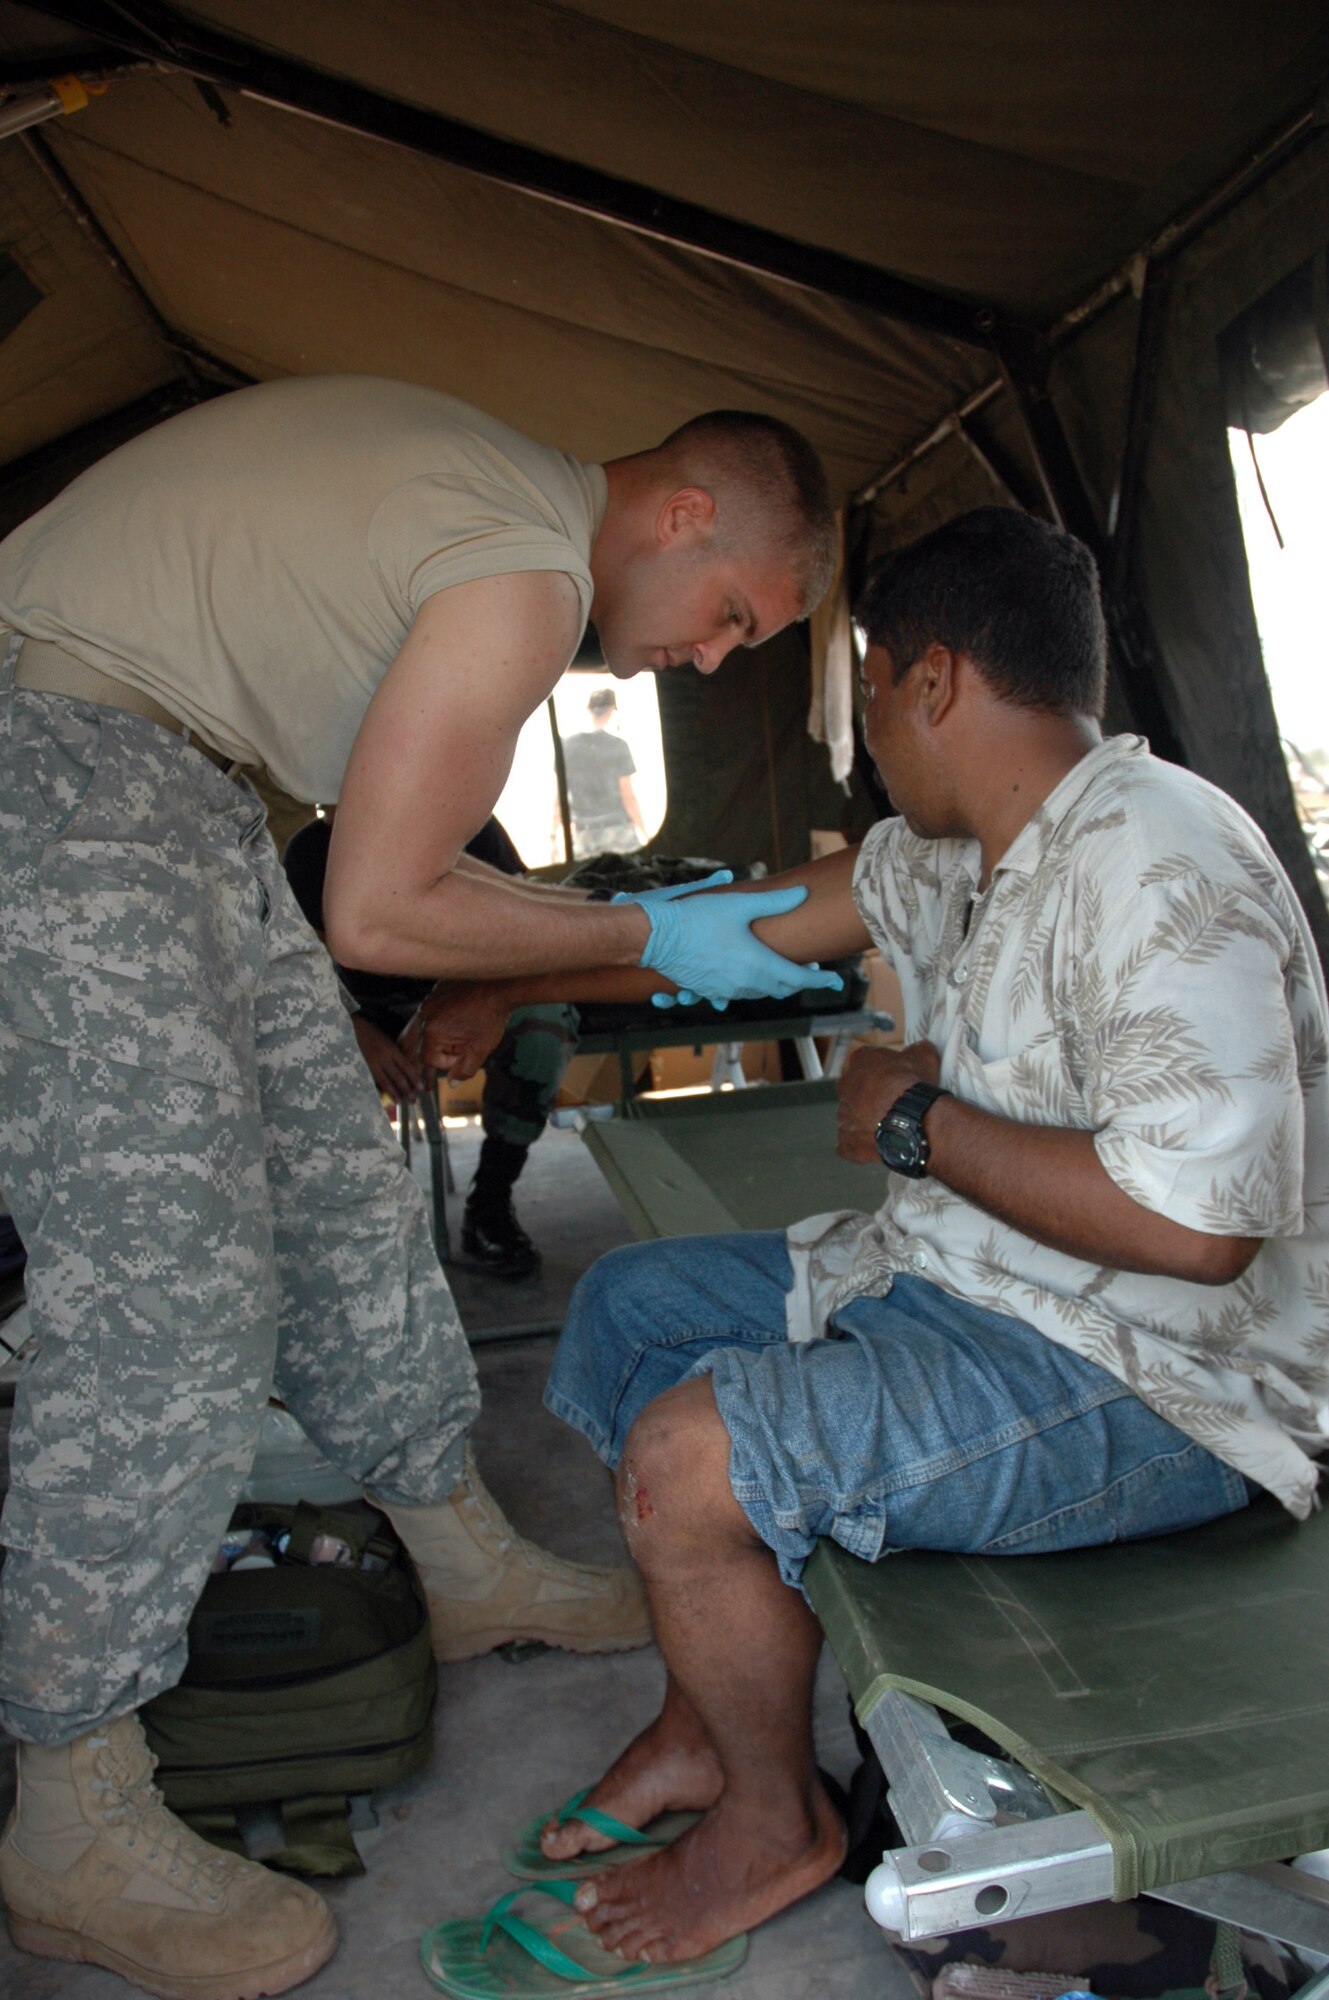 PUERTO CABEZAS, Nicaragua – Army medic Spc. Jonathan Potter provides medical care to a local man who was injured by flying debris on the flightline here Sept. 15.  Specialist Potter is part of a team deployed from Joint Task Force Bravo in Honduras to provide relief in Nicaragua after Hurricane Felix.  The U.S. State Department and Department of Defense are working together to bring food, water and other needed items to small communities on the Nicaraguan coast that were affected by the hurricane.  (Army photo by Specialist Grant Vaught)